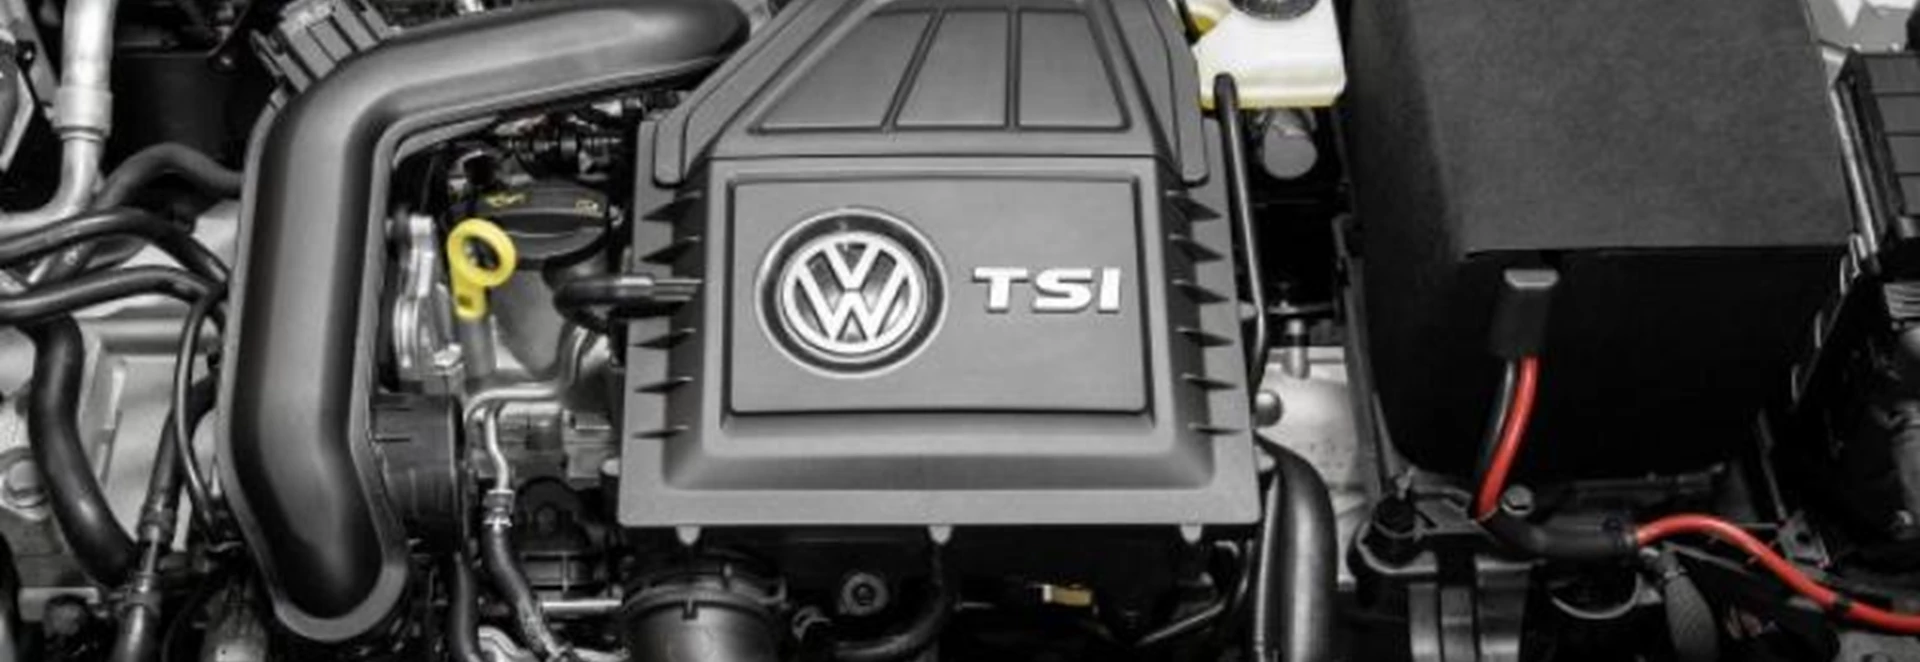 Volkswagen’s new, more efficient TSI petrol engine detailed